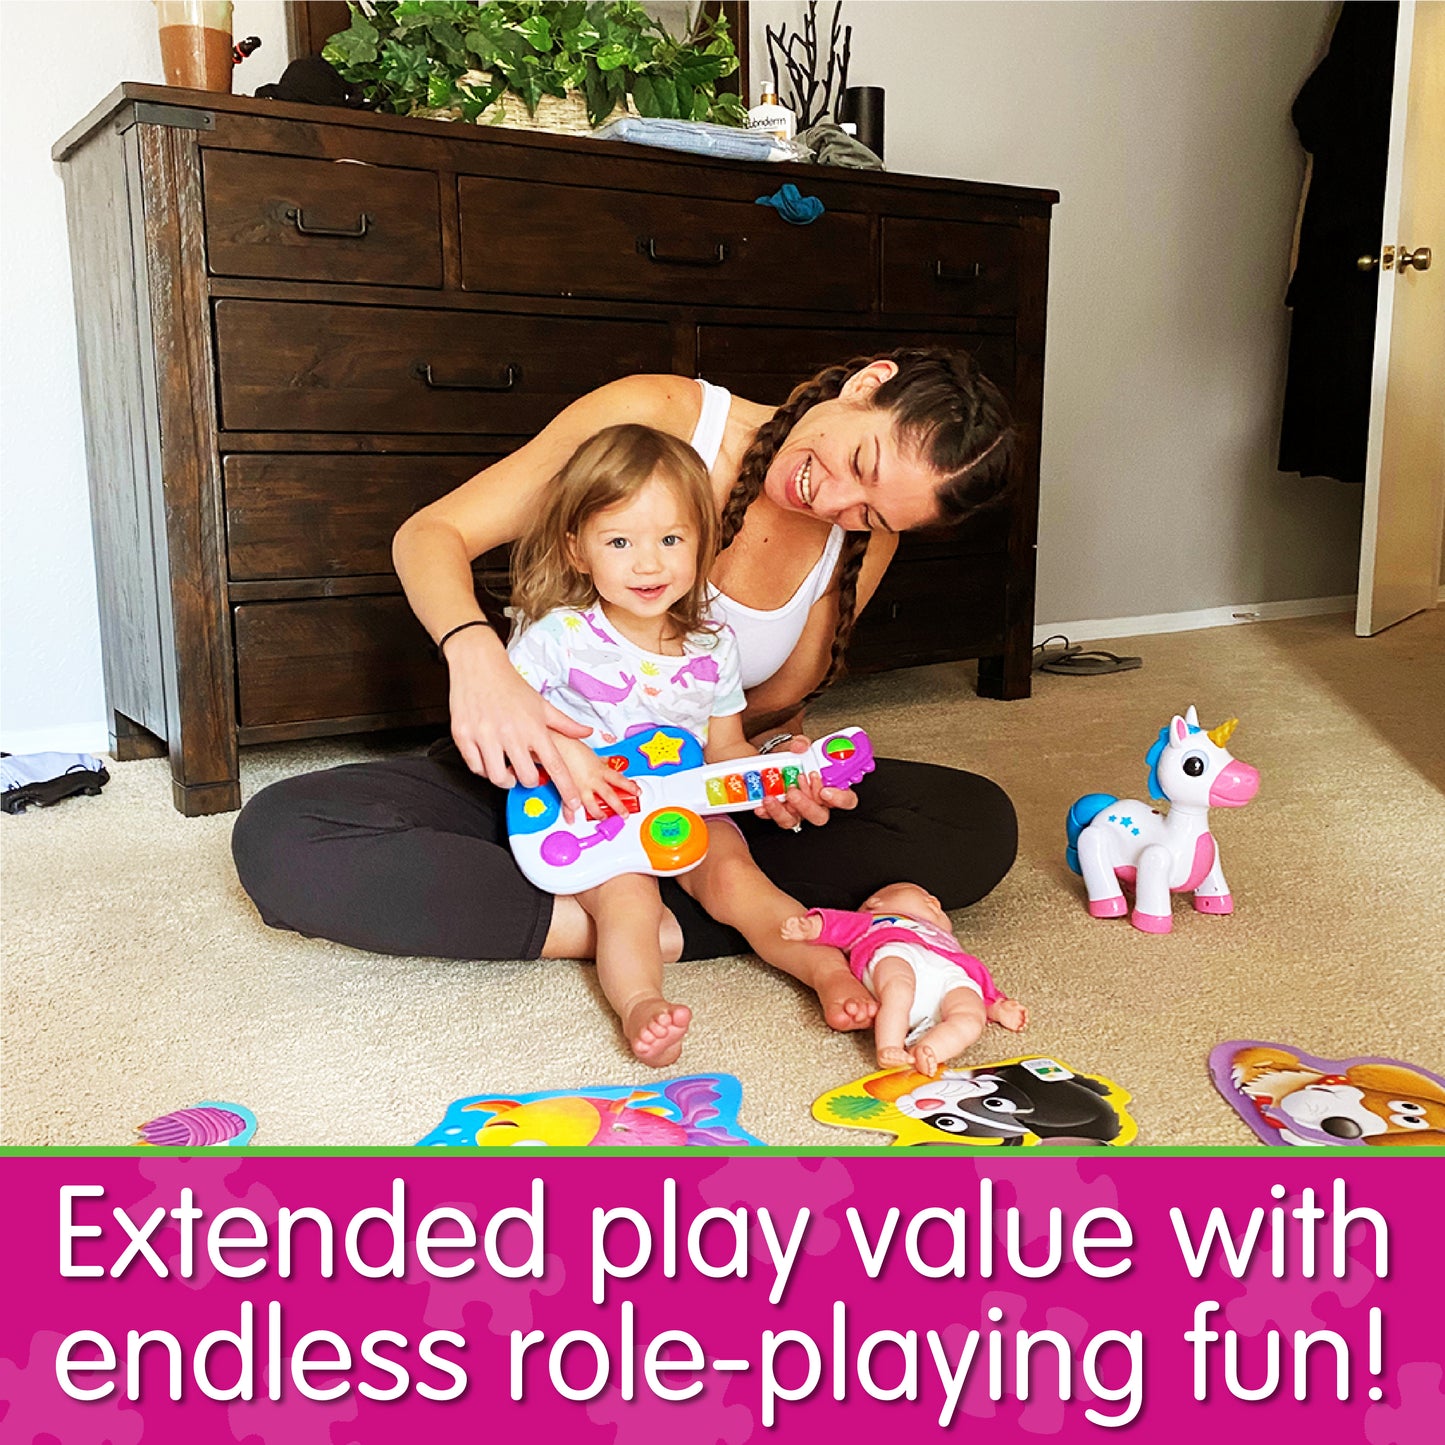 Infographic of mom and young daughter playing with Little Rock Star Guitar that says "Extended play value with endless role-playing fun!"